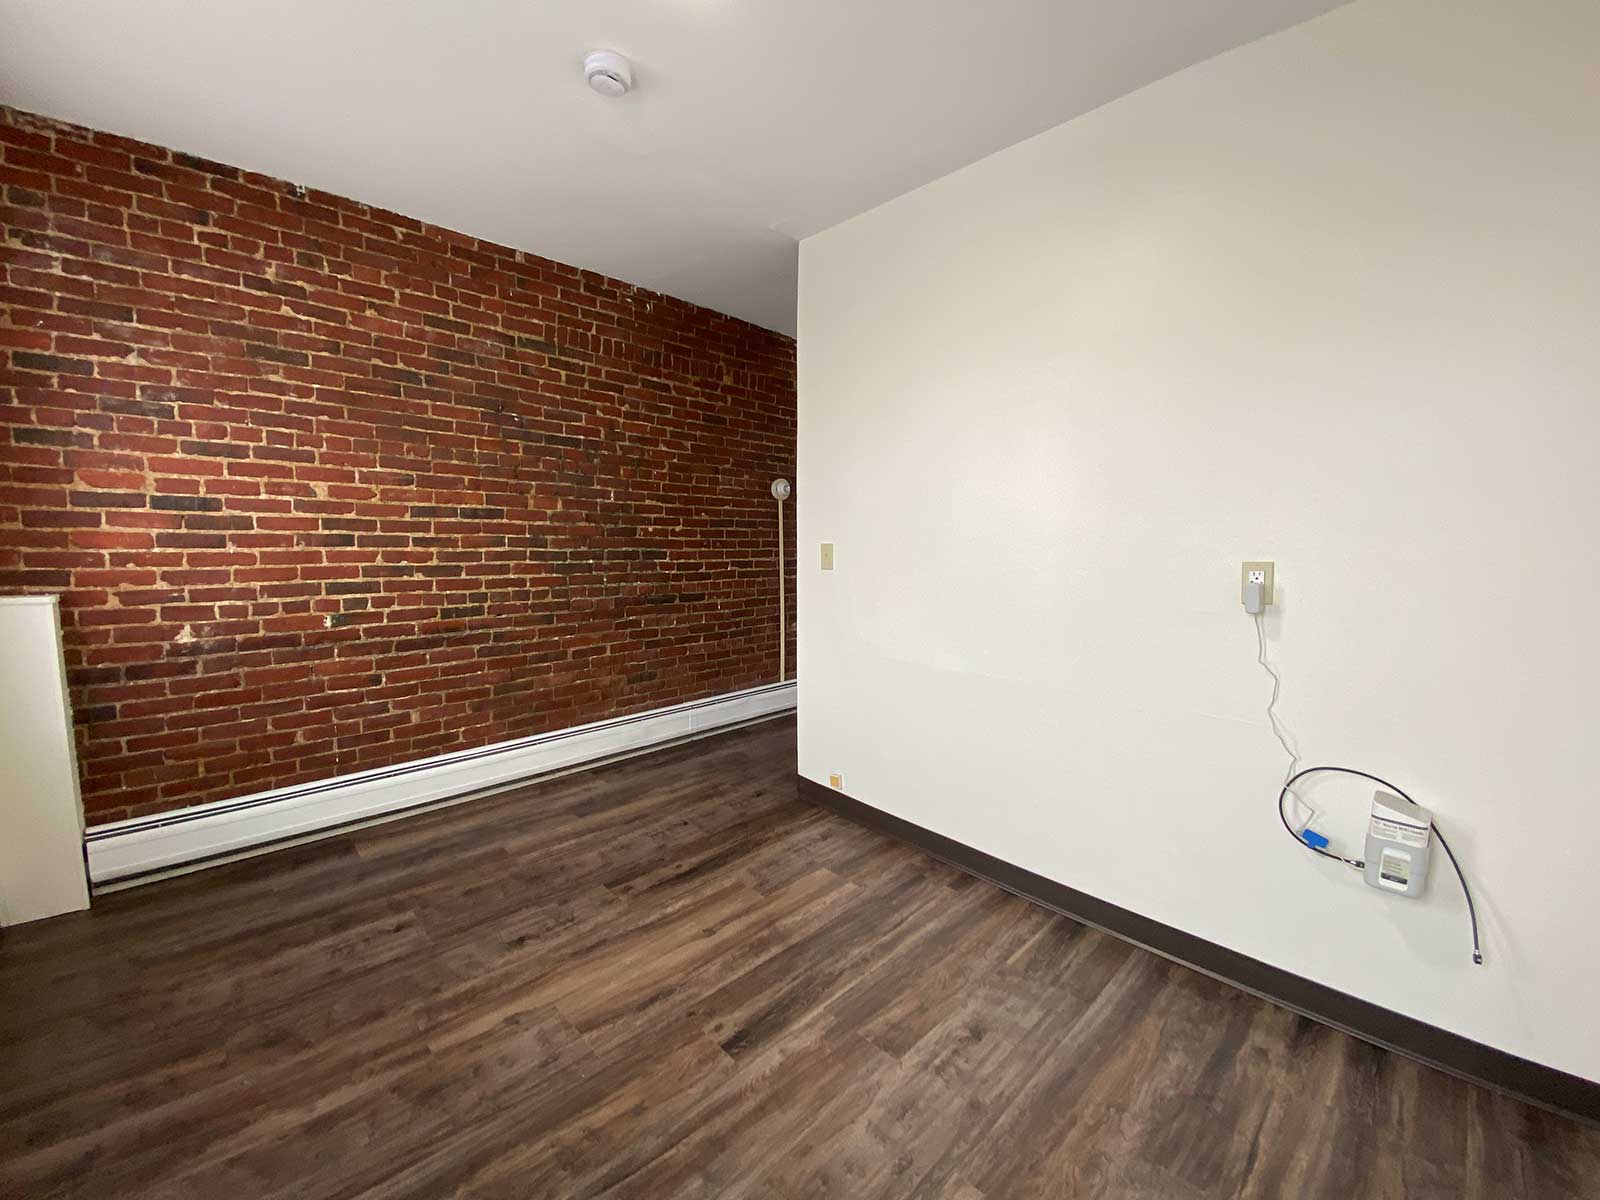 Studio with brick accent wall